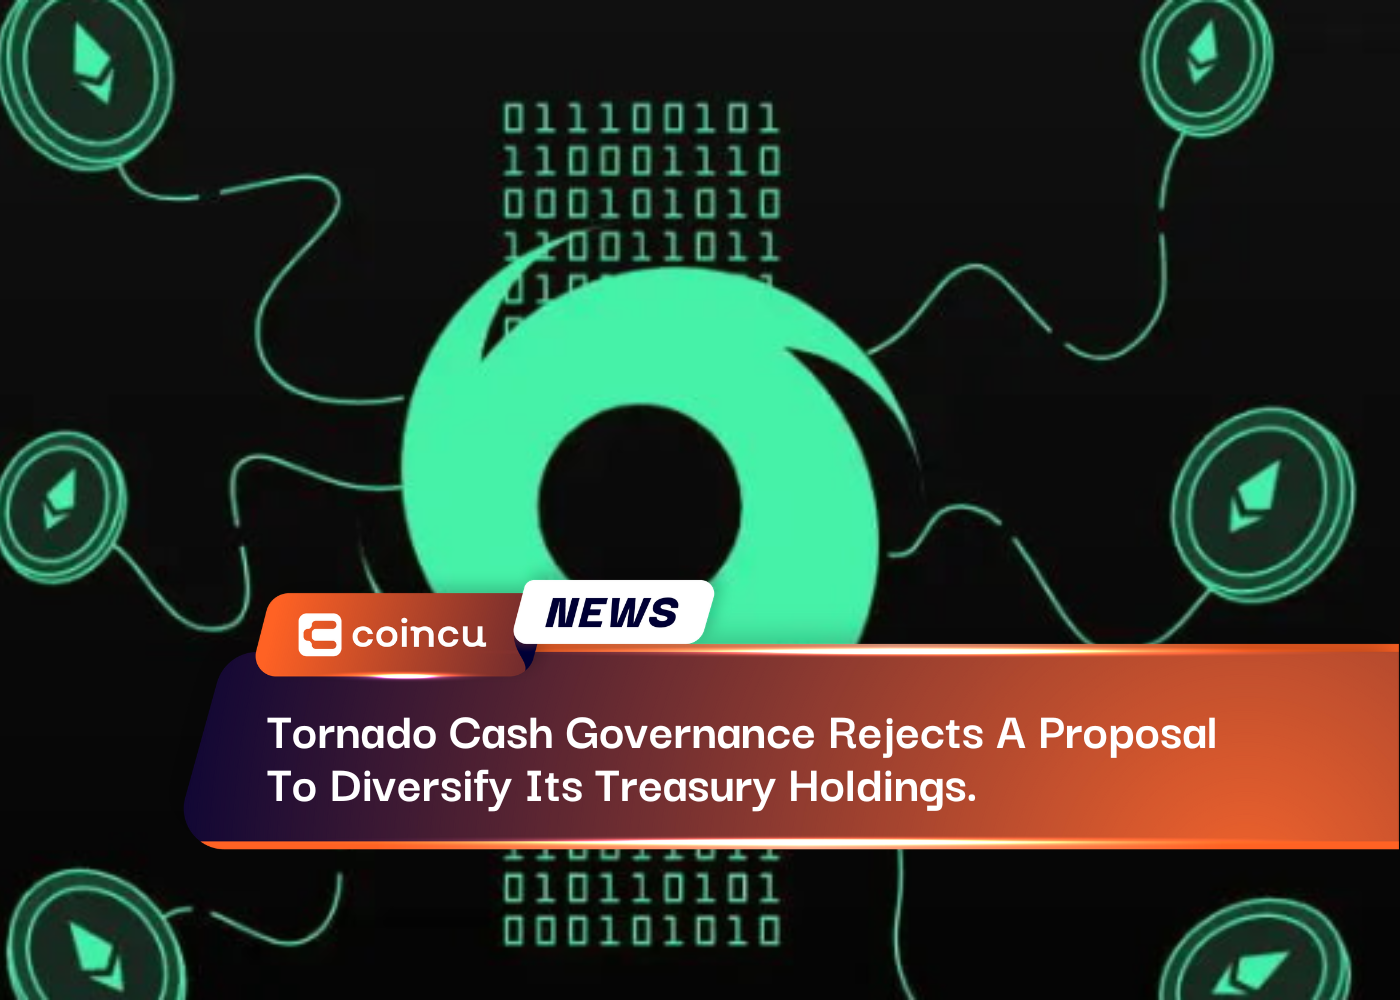 Tornado Cash Governance Rejects A Proposal To Diversify Its Treasury Holdings.